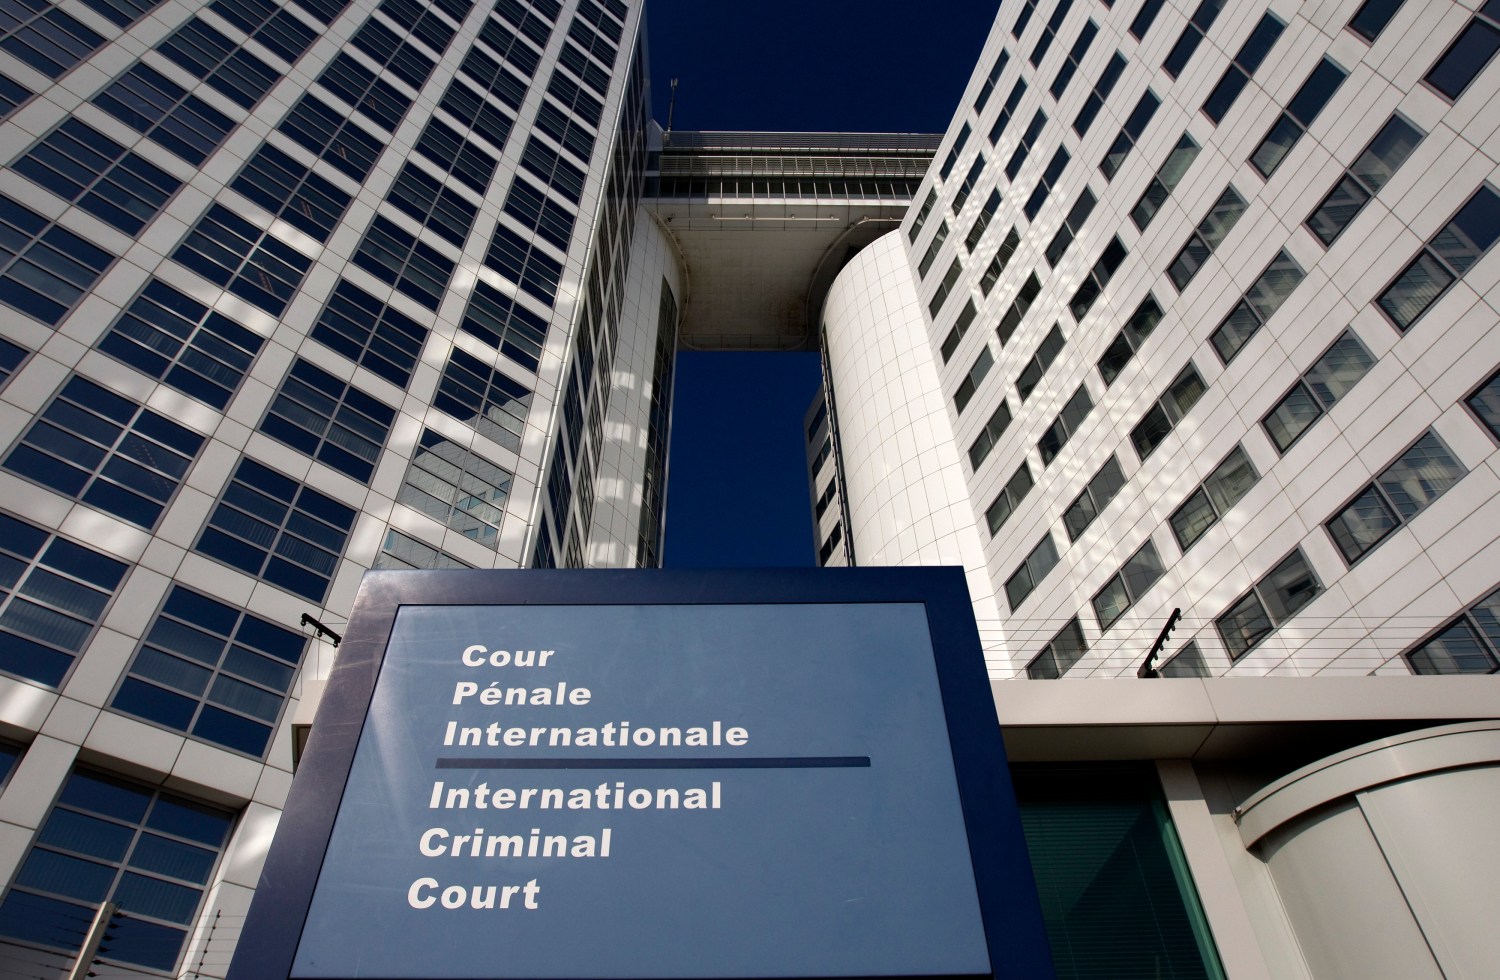 The entrance of the International Criminal Court (ICC) is seen in The Hague March 3, 2011. The ICC's chief prosecutor Luis Moreno-Ocampo said on Wednesday he would investigate the violence in Libya after the U.N. Security Council referred the case to the Hague-based war crimes tribunal. The Security Council on Saturday imposed sanctions on Libyan leader Muammar Gaddafi and his family, and referred Libya's crackdown on anti-government demonstrators to the ICC.  REUTERS/Jerry Lampen (NETHERLANDS - Tags: POLITICS CIVIL UNREST CRIME LAW) - GM1E7331ICD01